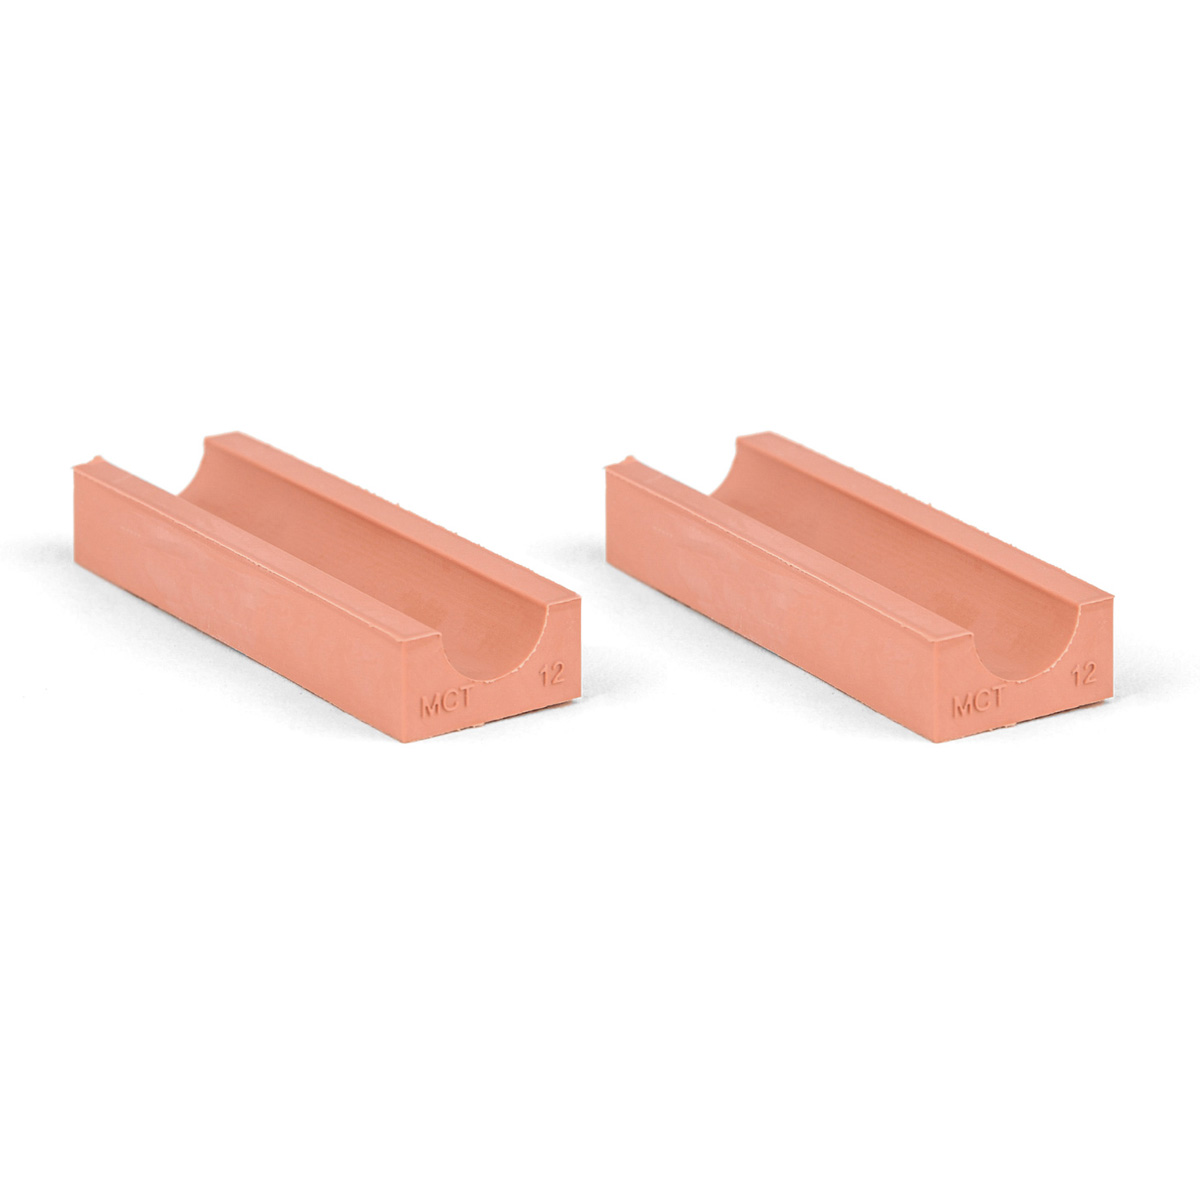 20-12*2 Set of 2 half insert block lycron 30mm, 20-12 for cable/pipe diam. 11.5-12.5mm